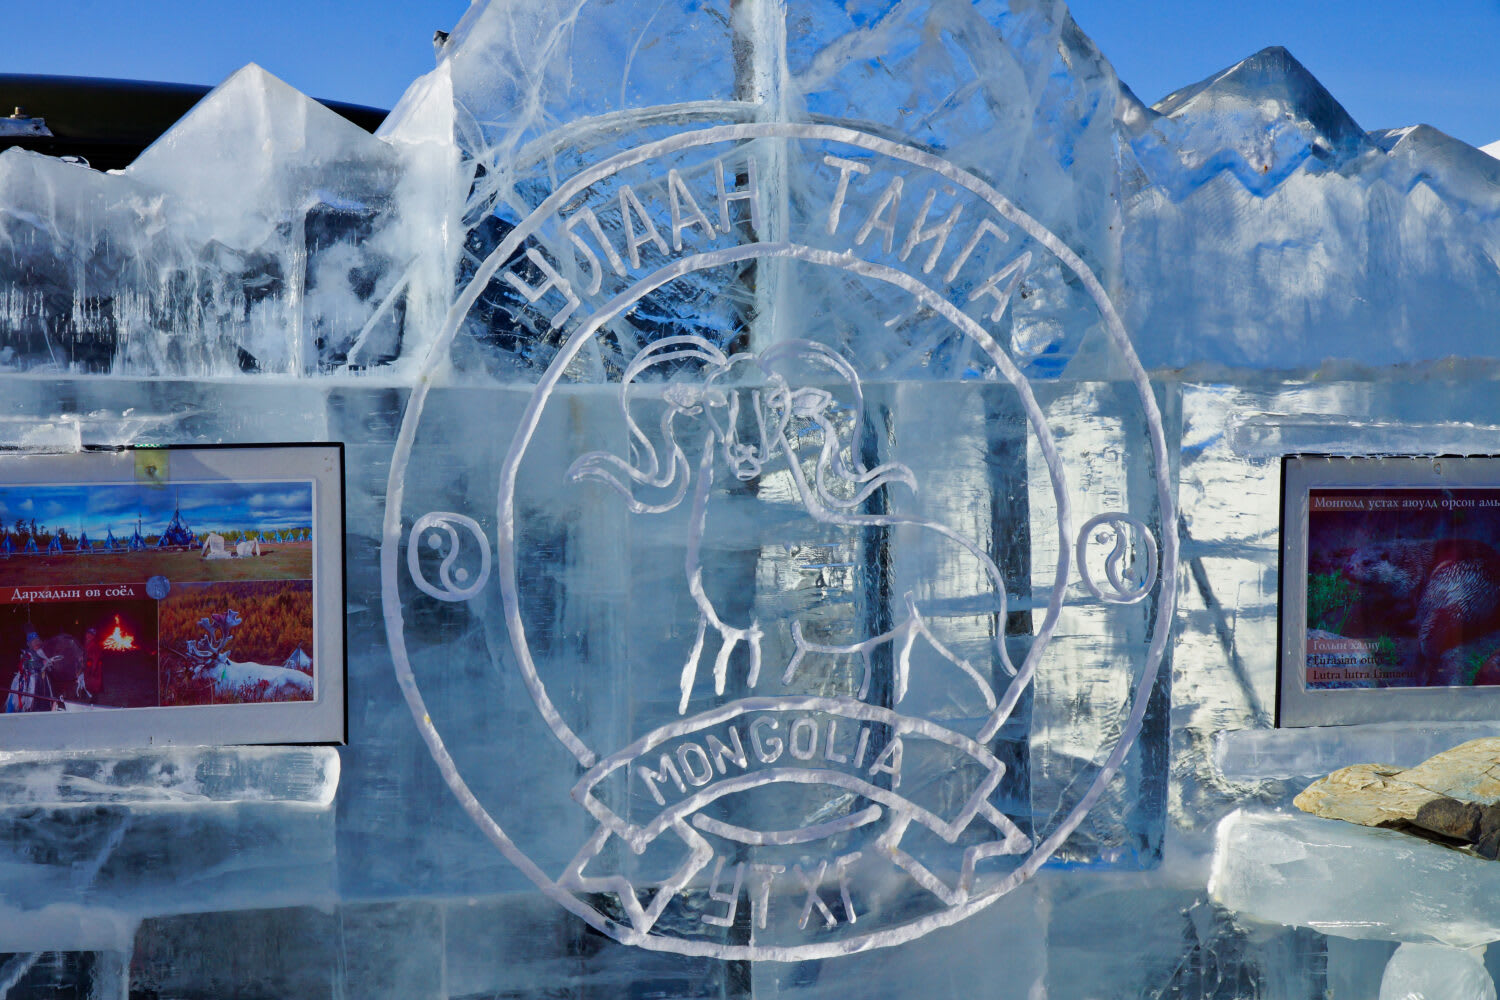 5 reasons to visit the Ice Festival in Mongolia